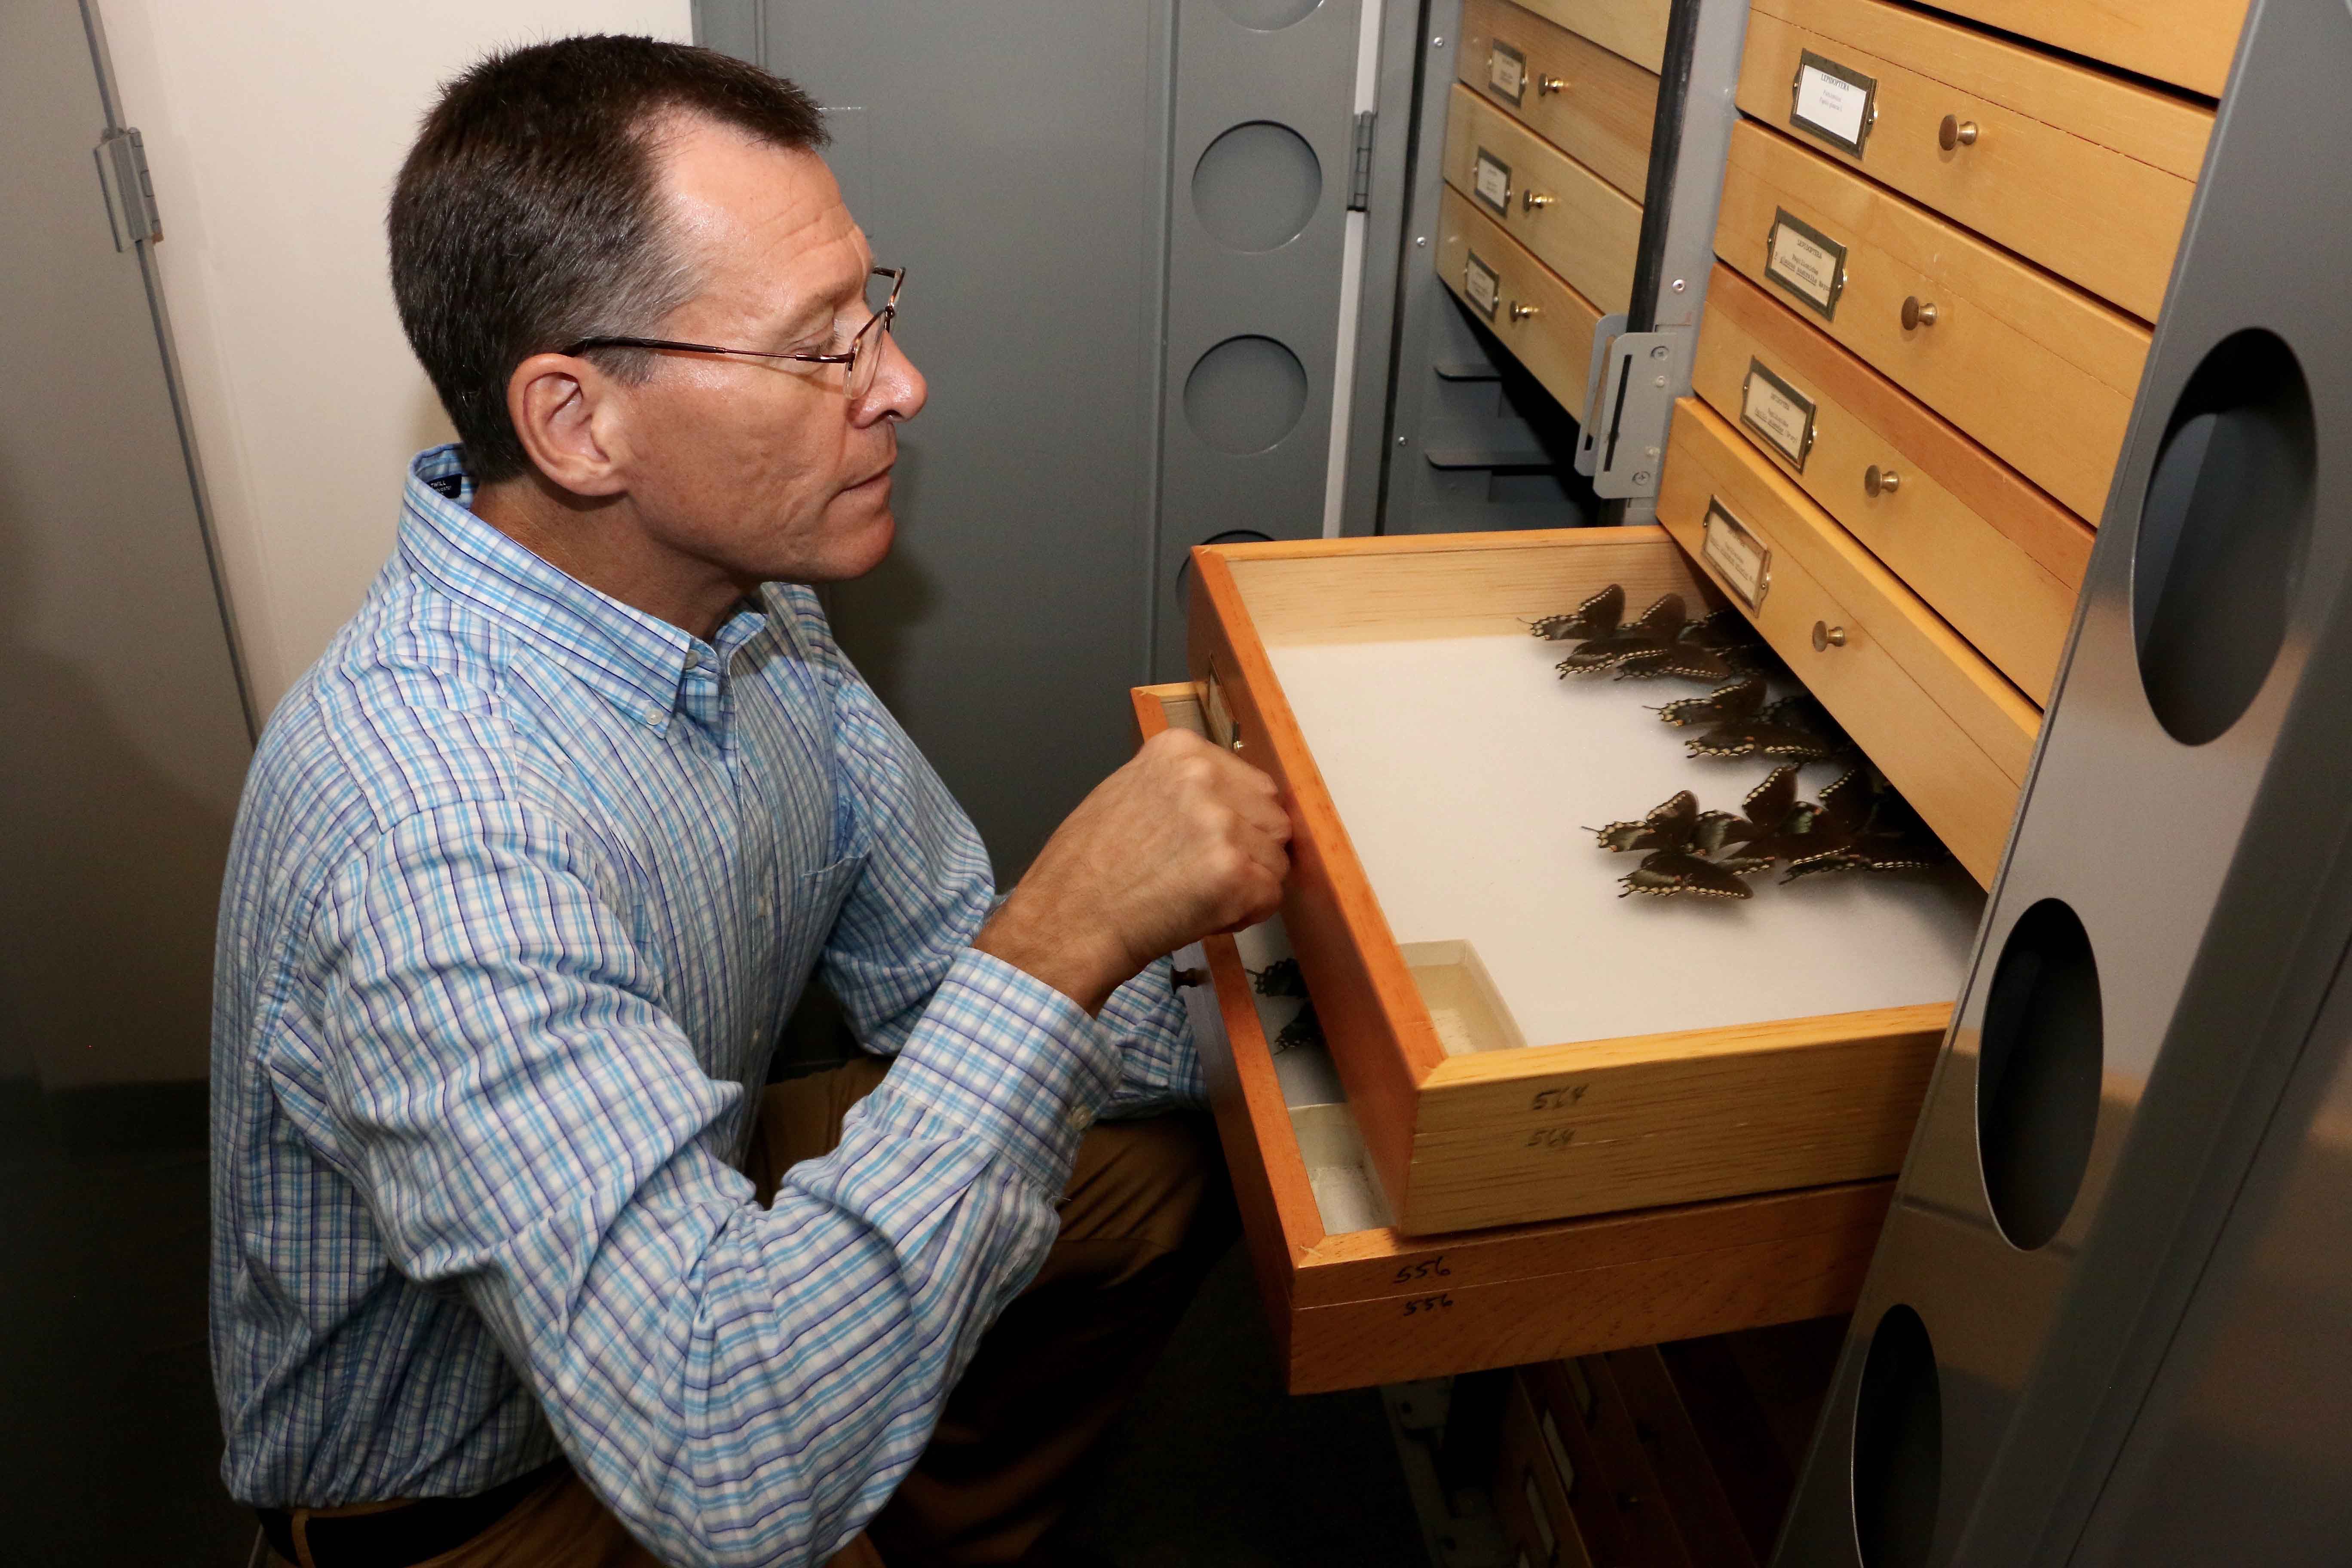 As part of the LepNet project, Joe McHugh, professor of entomology at the UGA College of Agricultural and Environmental Sciences and curator of the arthropod collection at the Georgia Museum of Natural History, will help lead the effort to digitize millions of butterfly and moth specimens now locked away in museum collections across the nation.